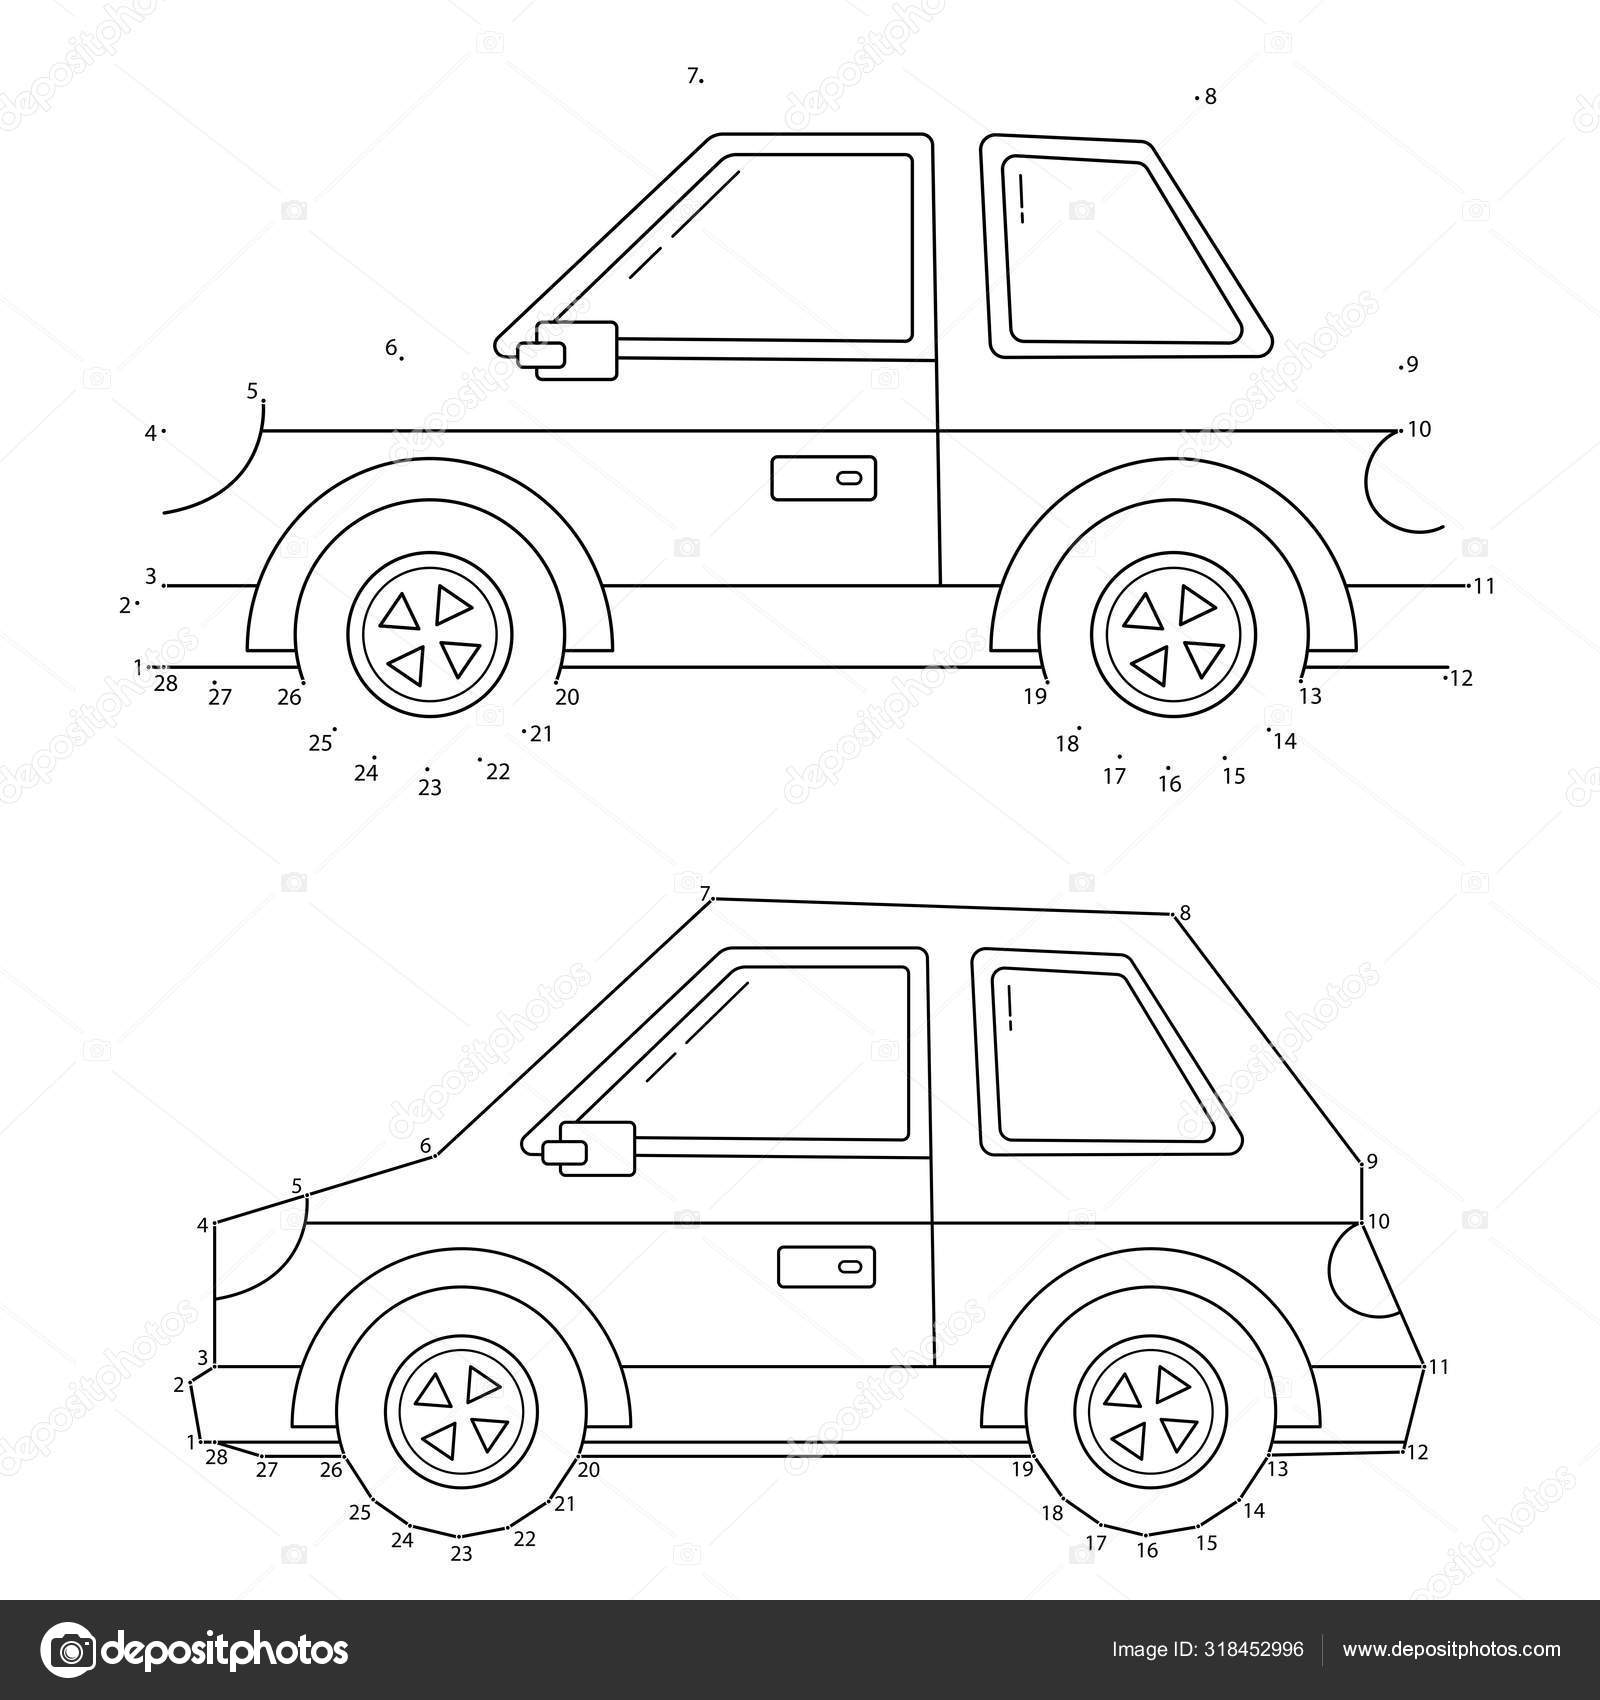 Car educational puzzle game for kids numbers game image transport or vehicle for children coloring book stock vector by oleon